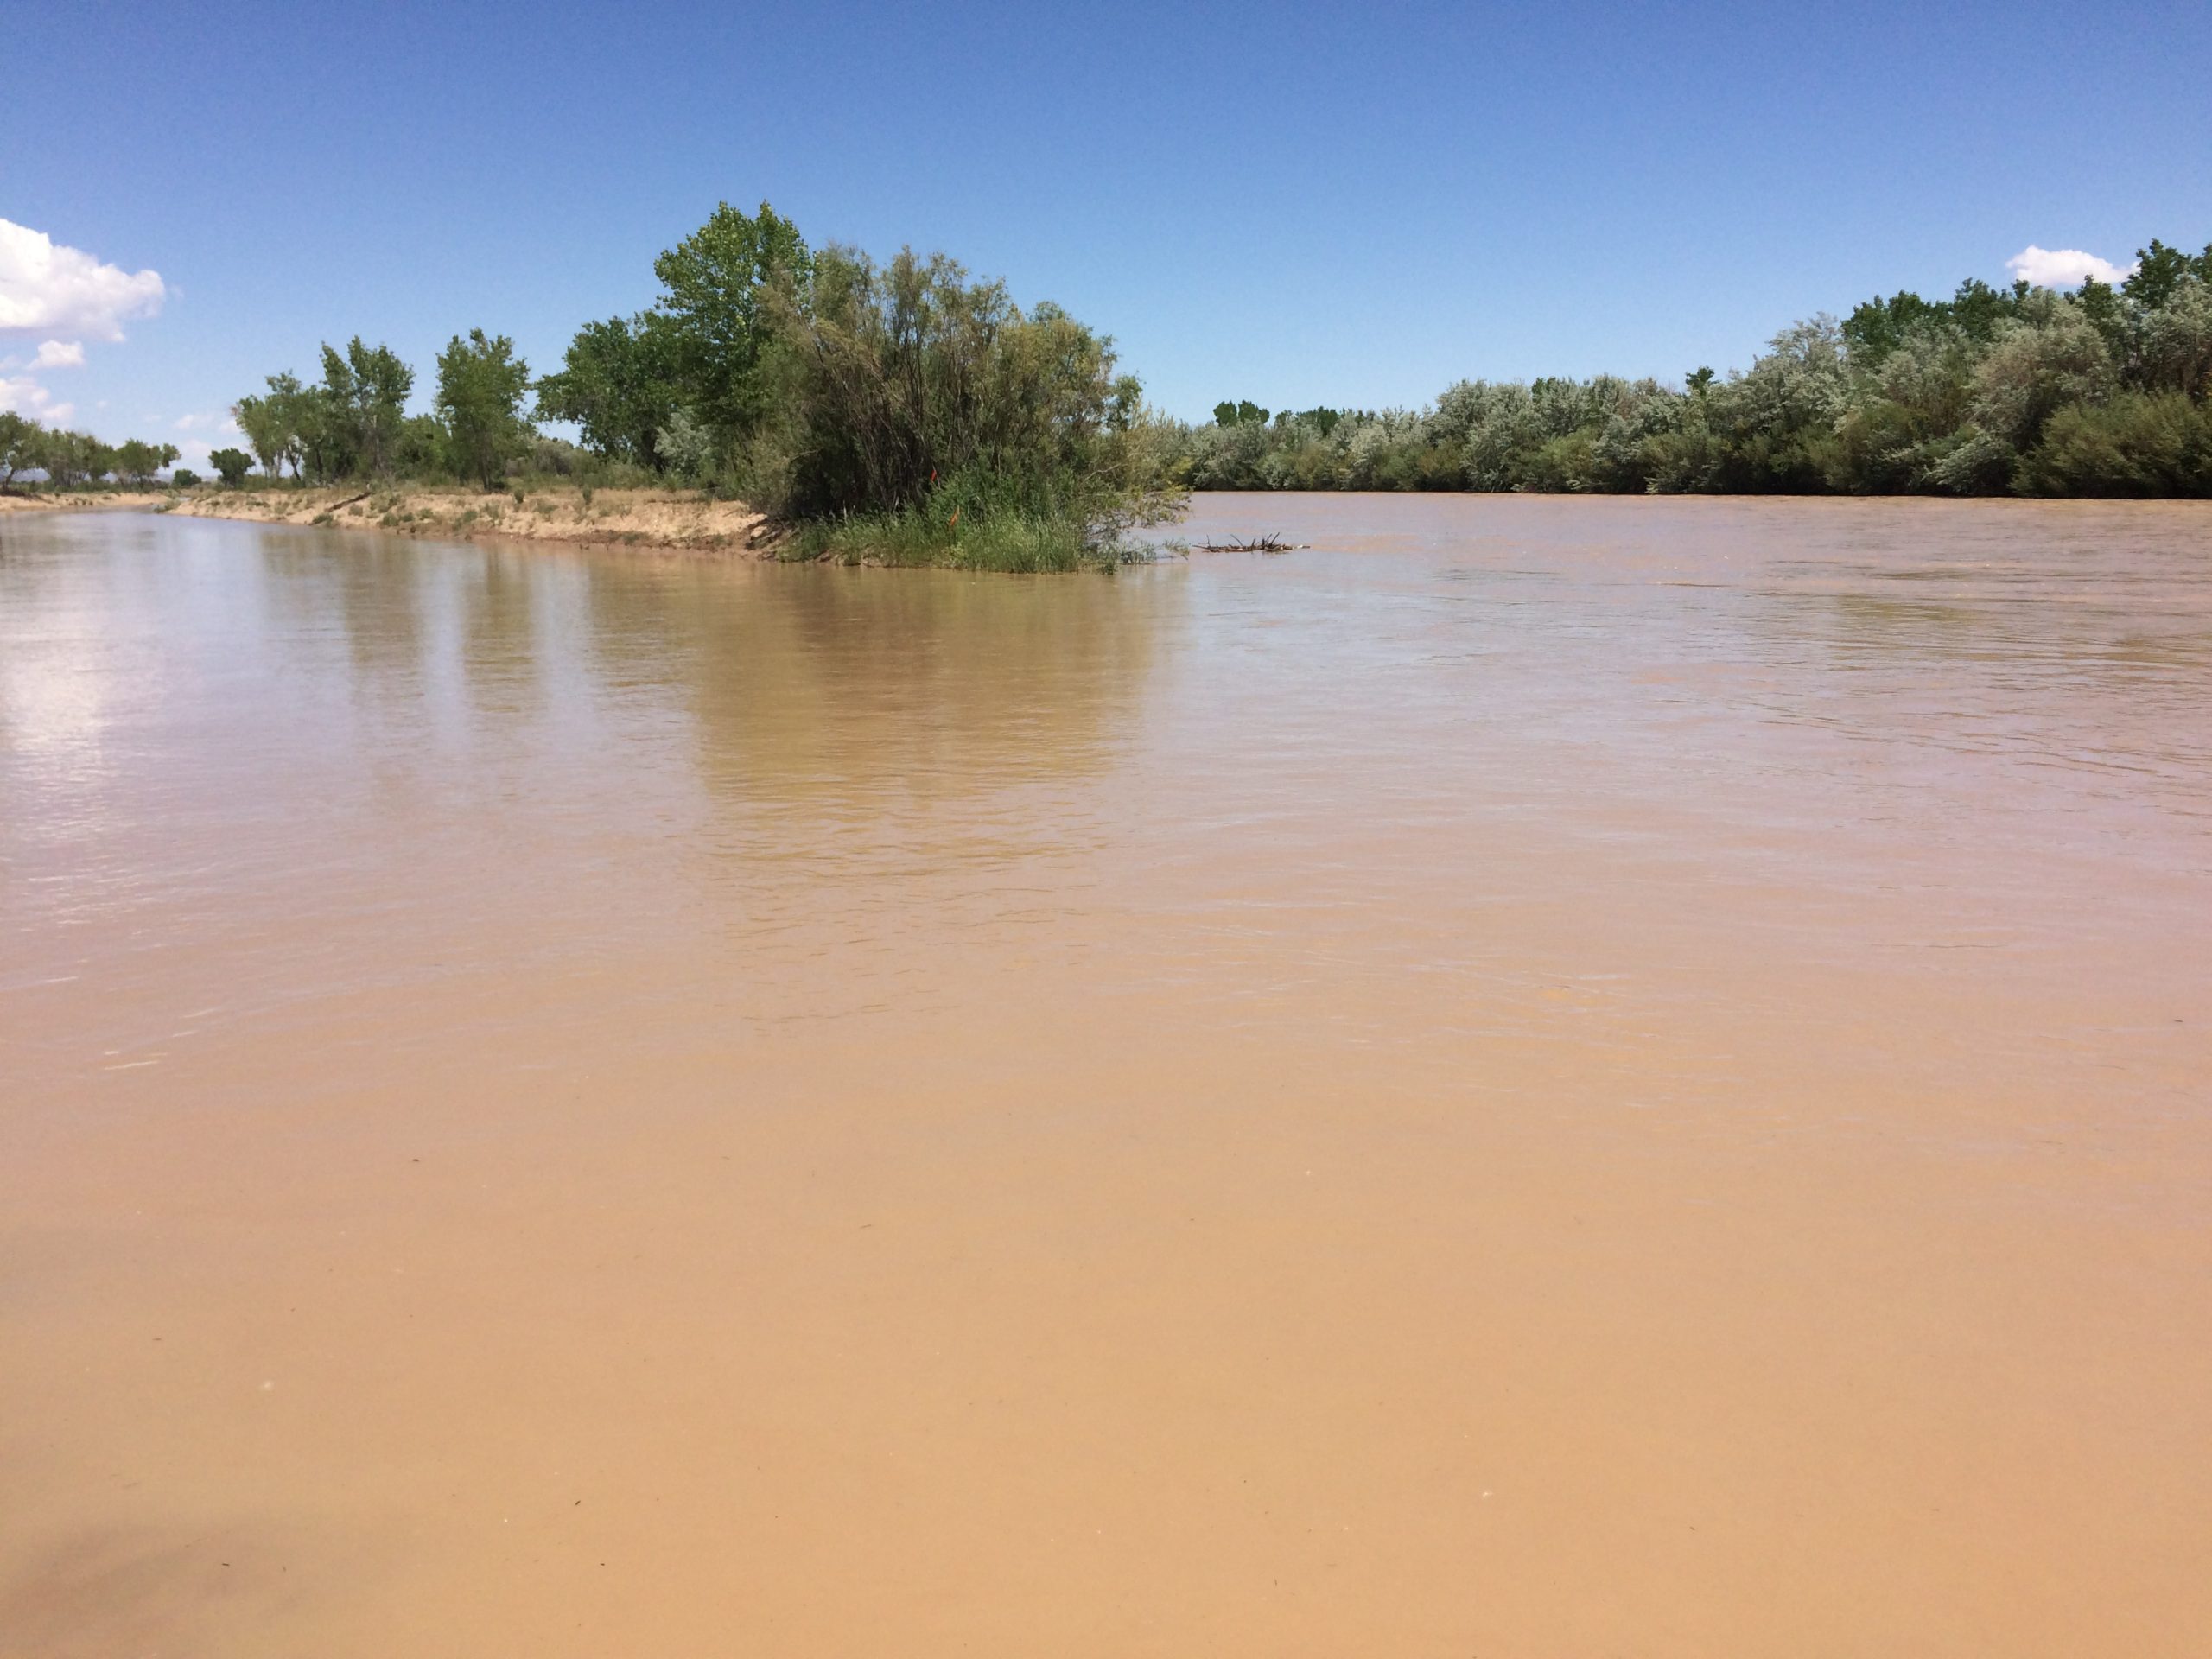 NM Environment Review: Watching water, PFAS investigation + the militarization of climate change